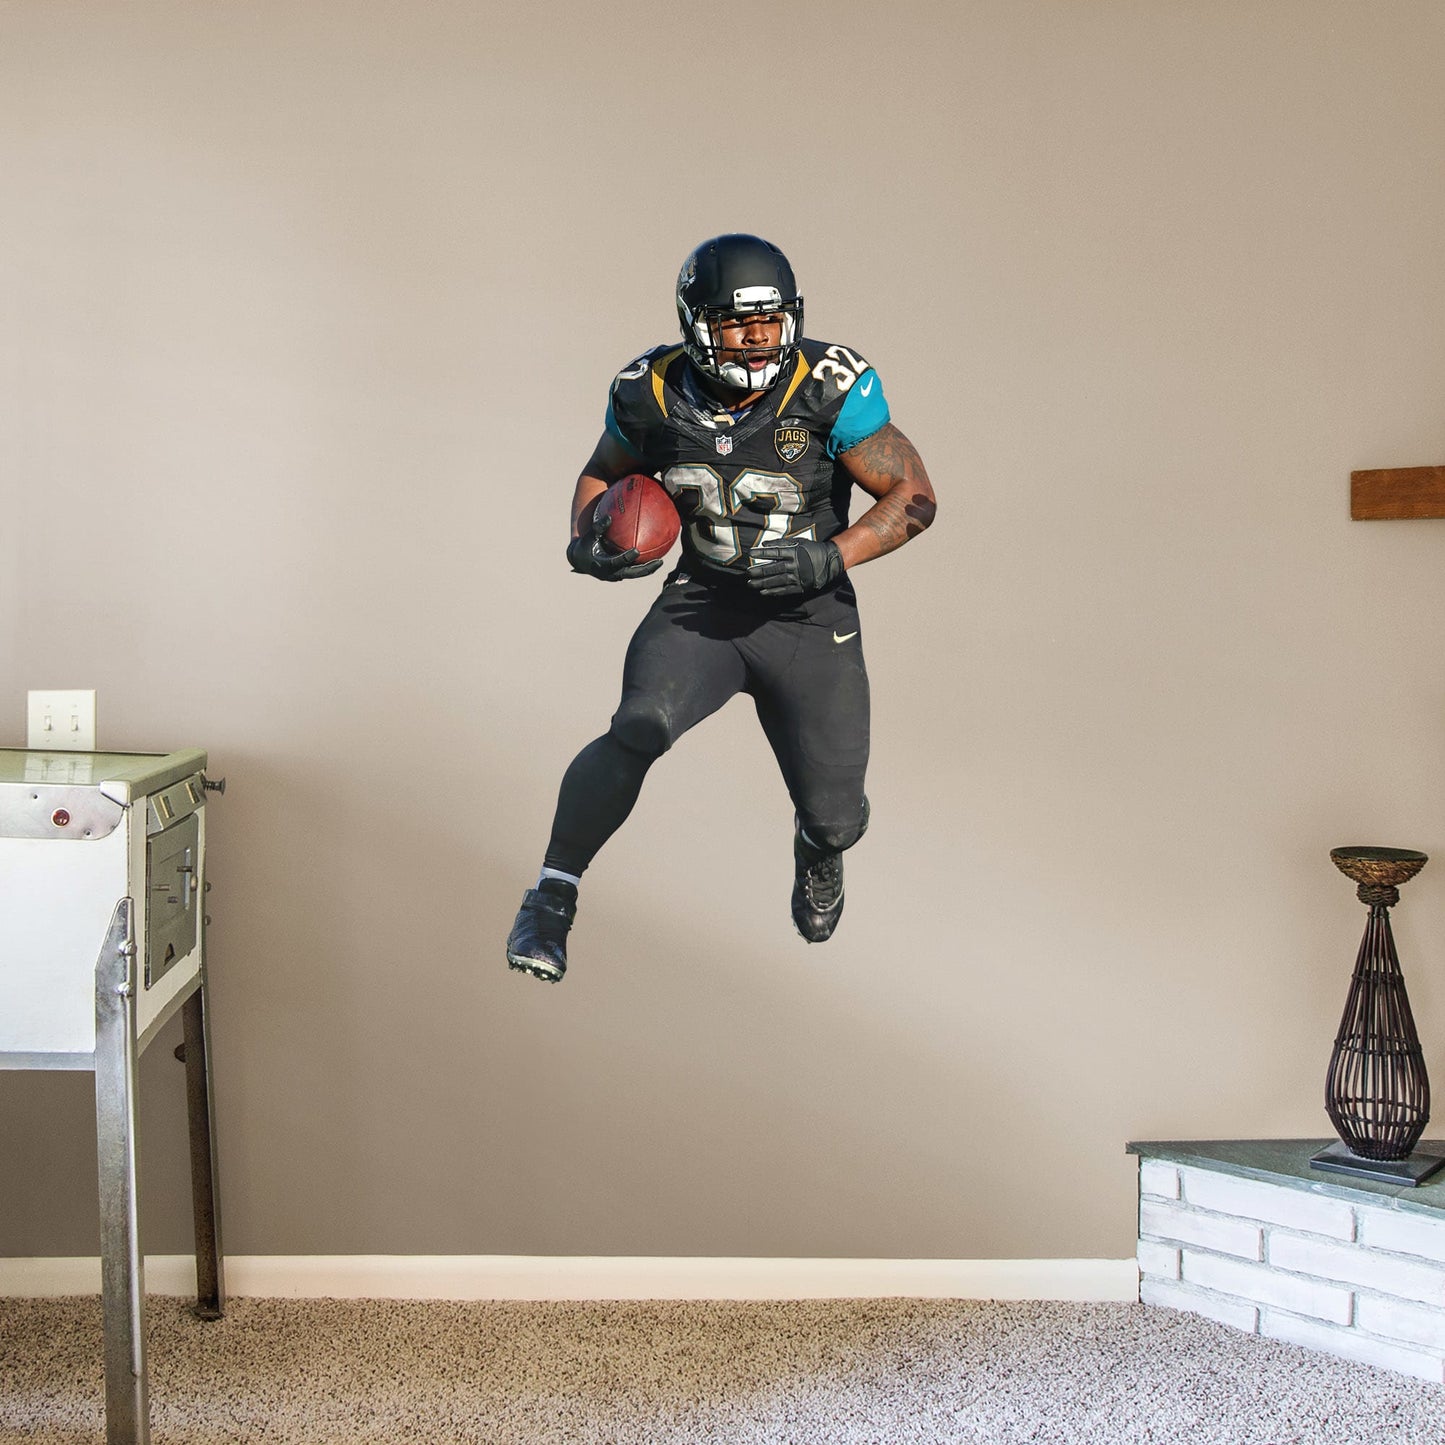 Giant Athlete + 2 Decals (29"W x 51"H) Bring the action of the NFL into your home with a wall decal of Maurice Jones-Drew! High quality, durable, and tear resistant, you'll be able to stick and move it as many times as you want to create the ultimate football experience in any room!